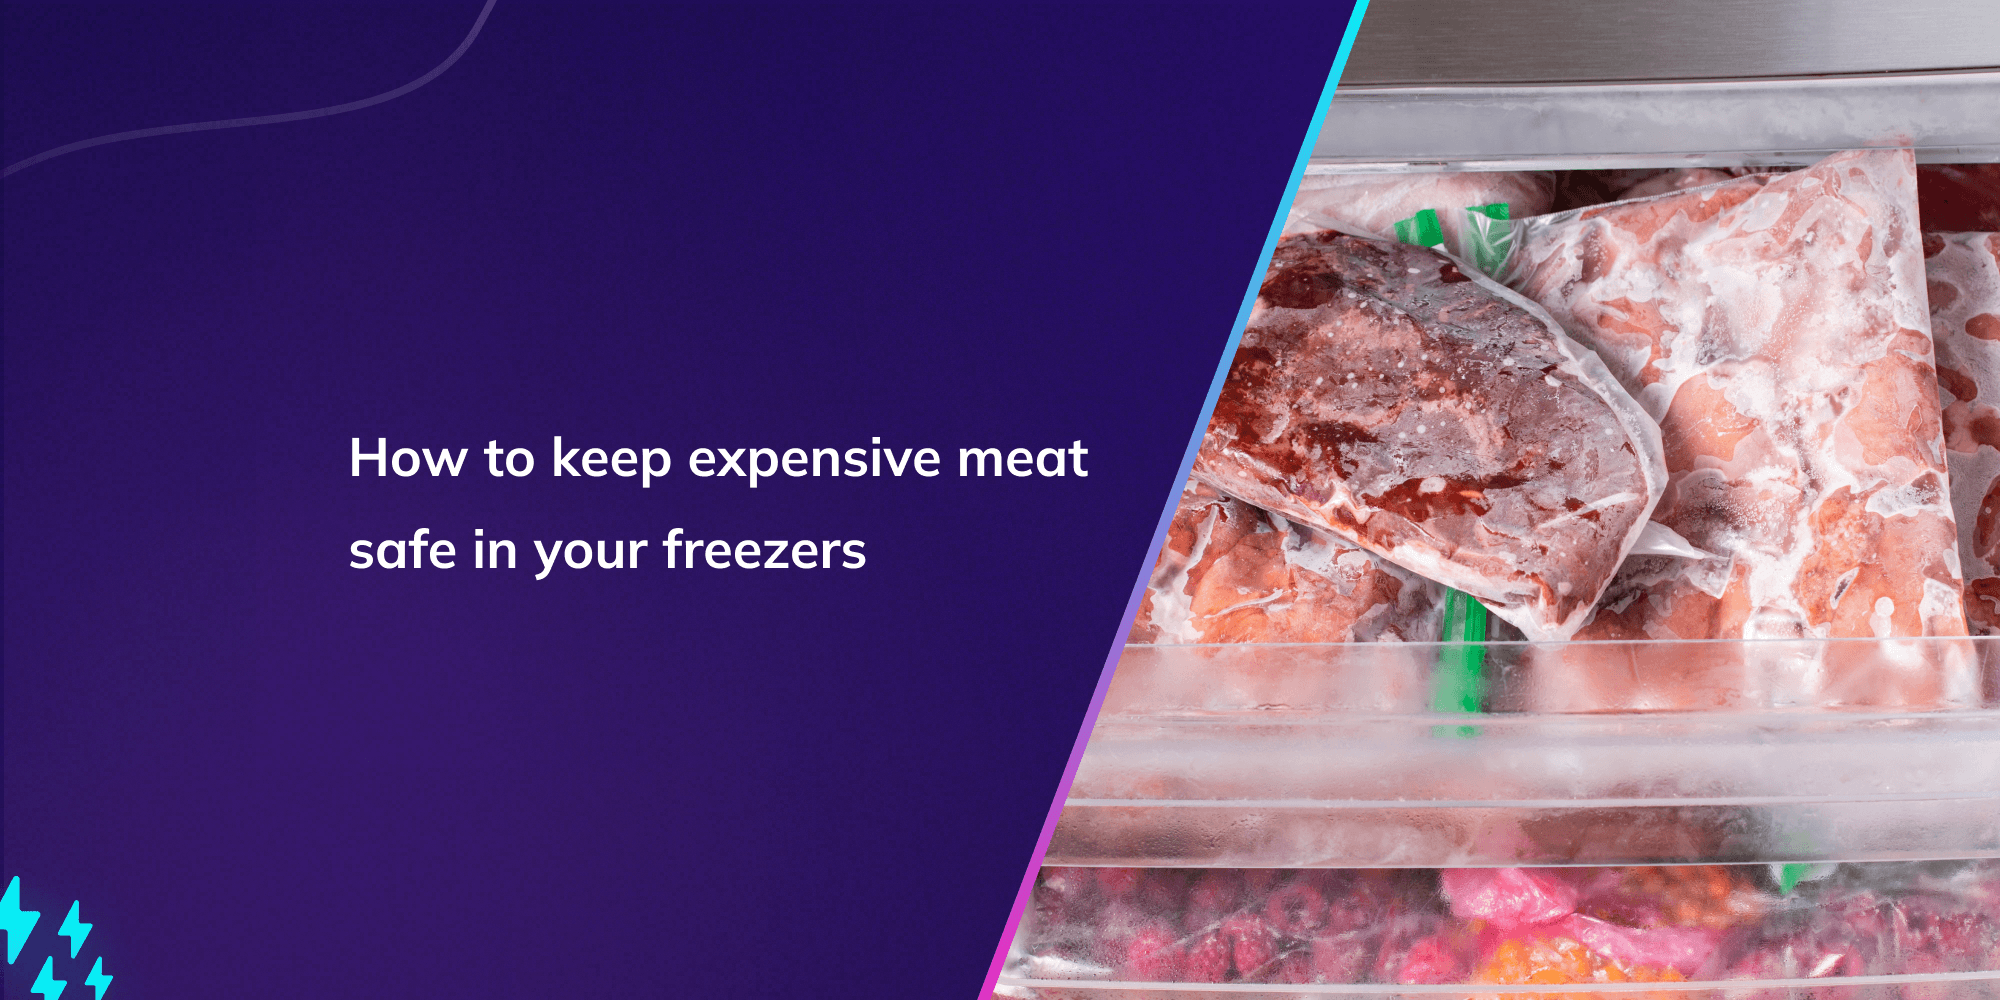 How to keep expensive meat safe in your freezers